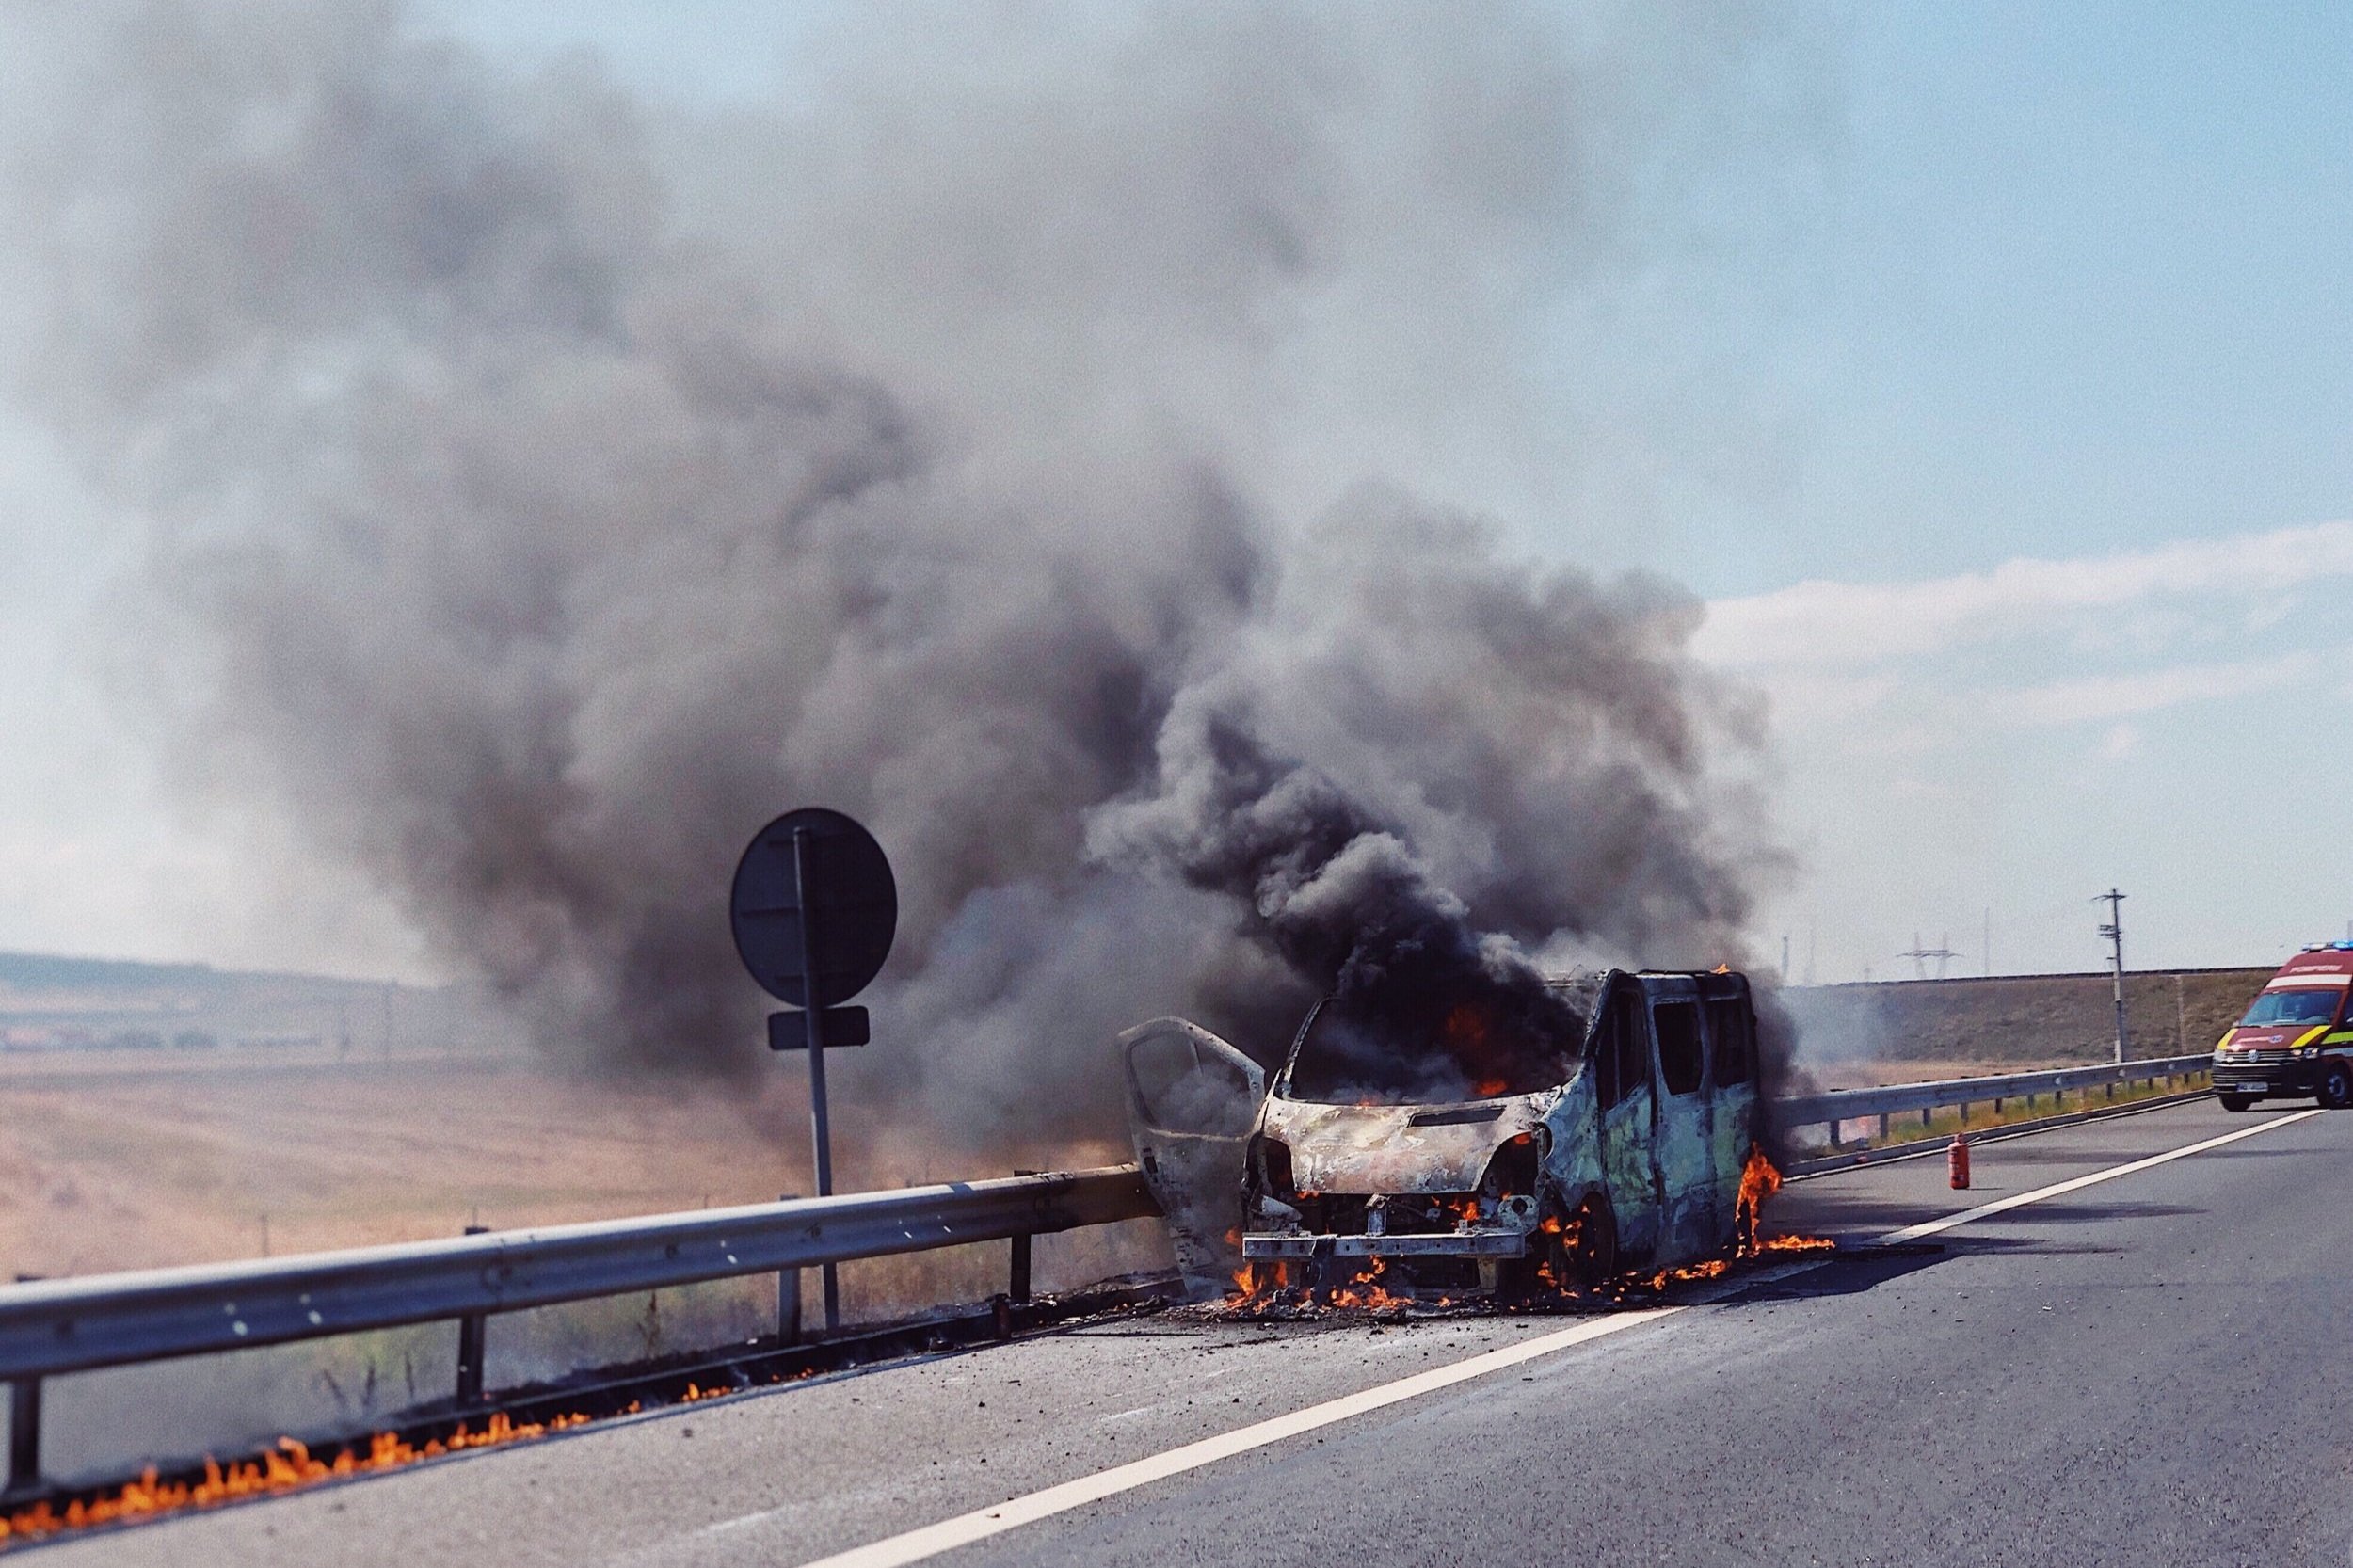 a-car-engulfed-by-fire-on-highway-during-a-very-hi-2021-09-04-05-06-57-utc.jpg